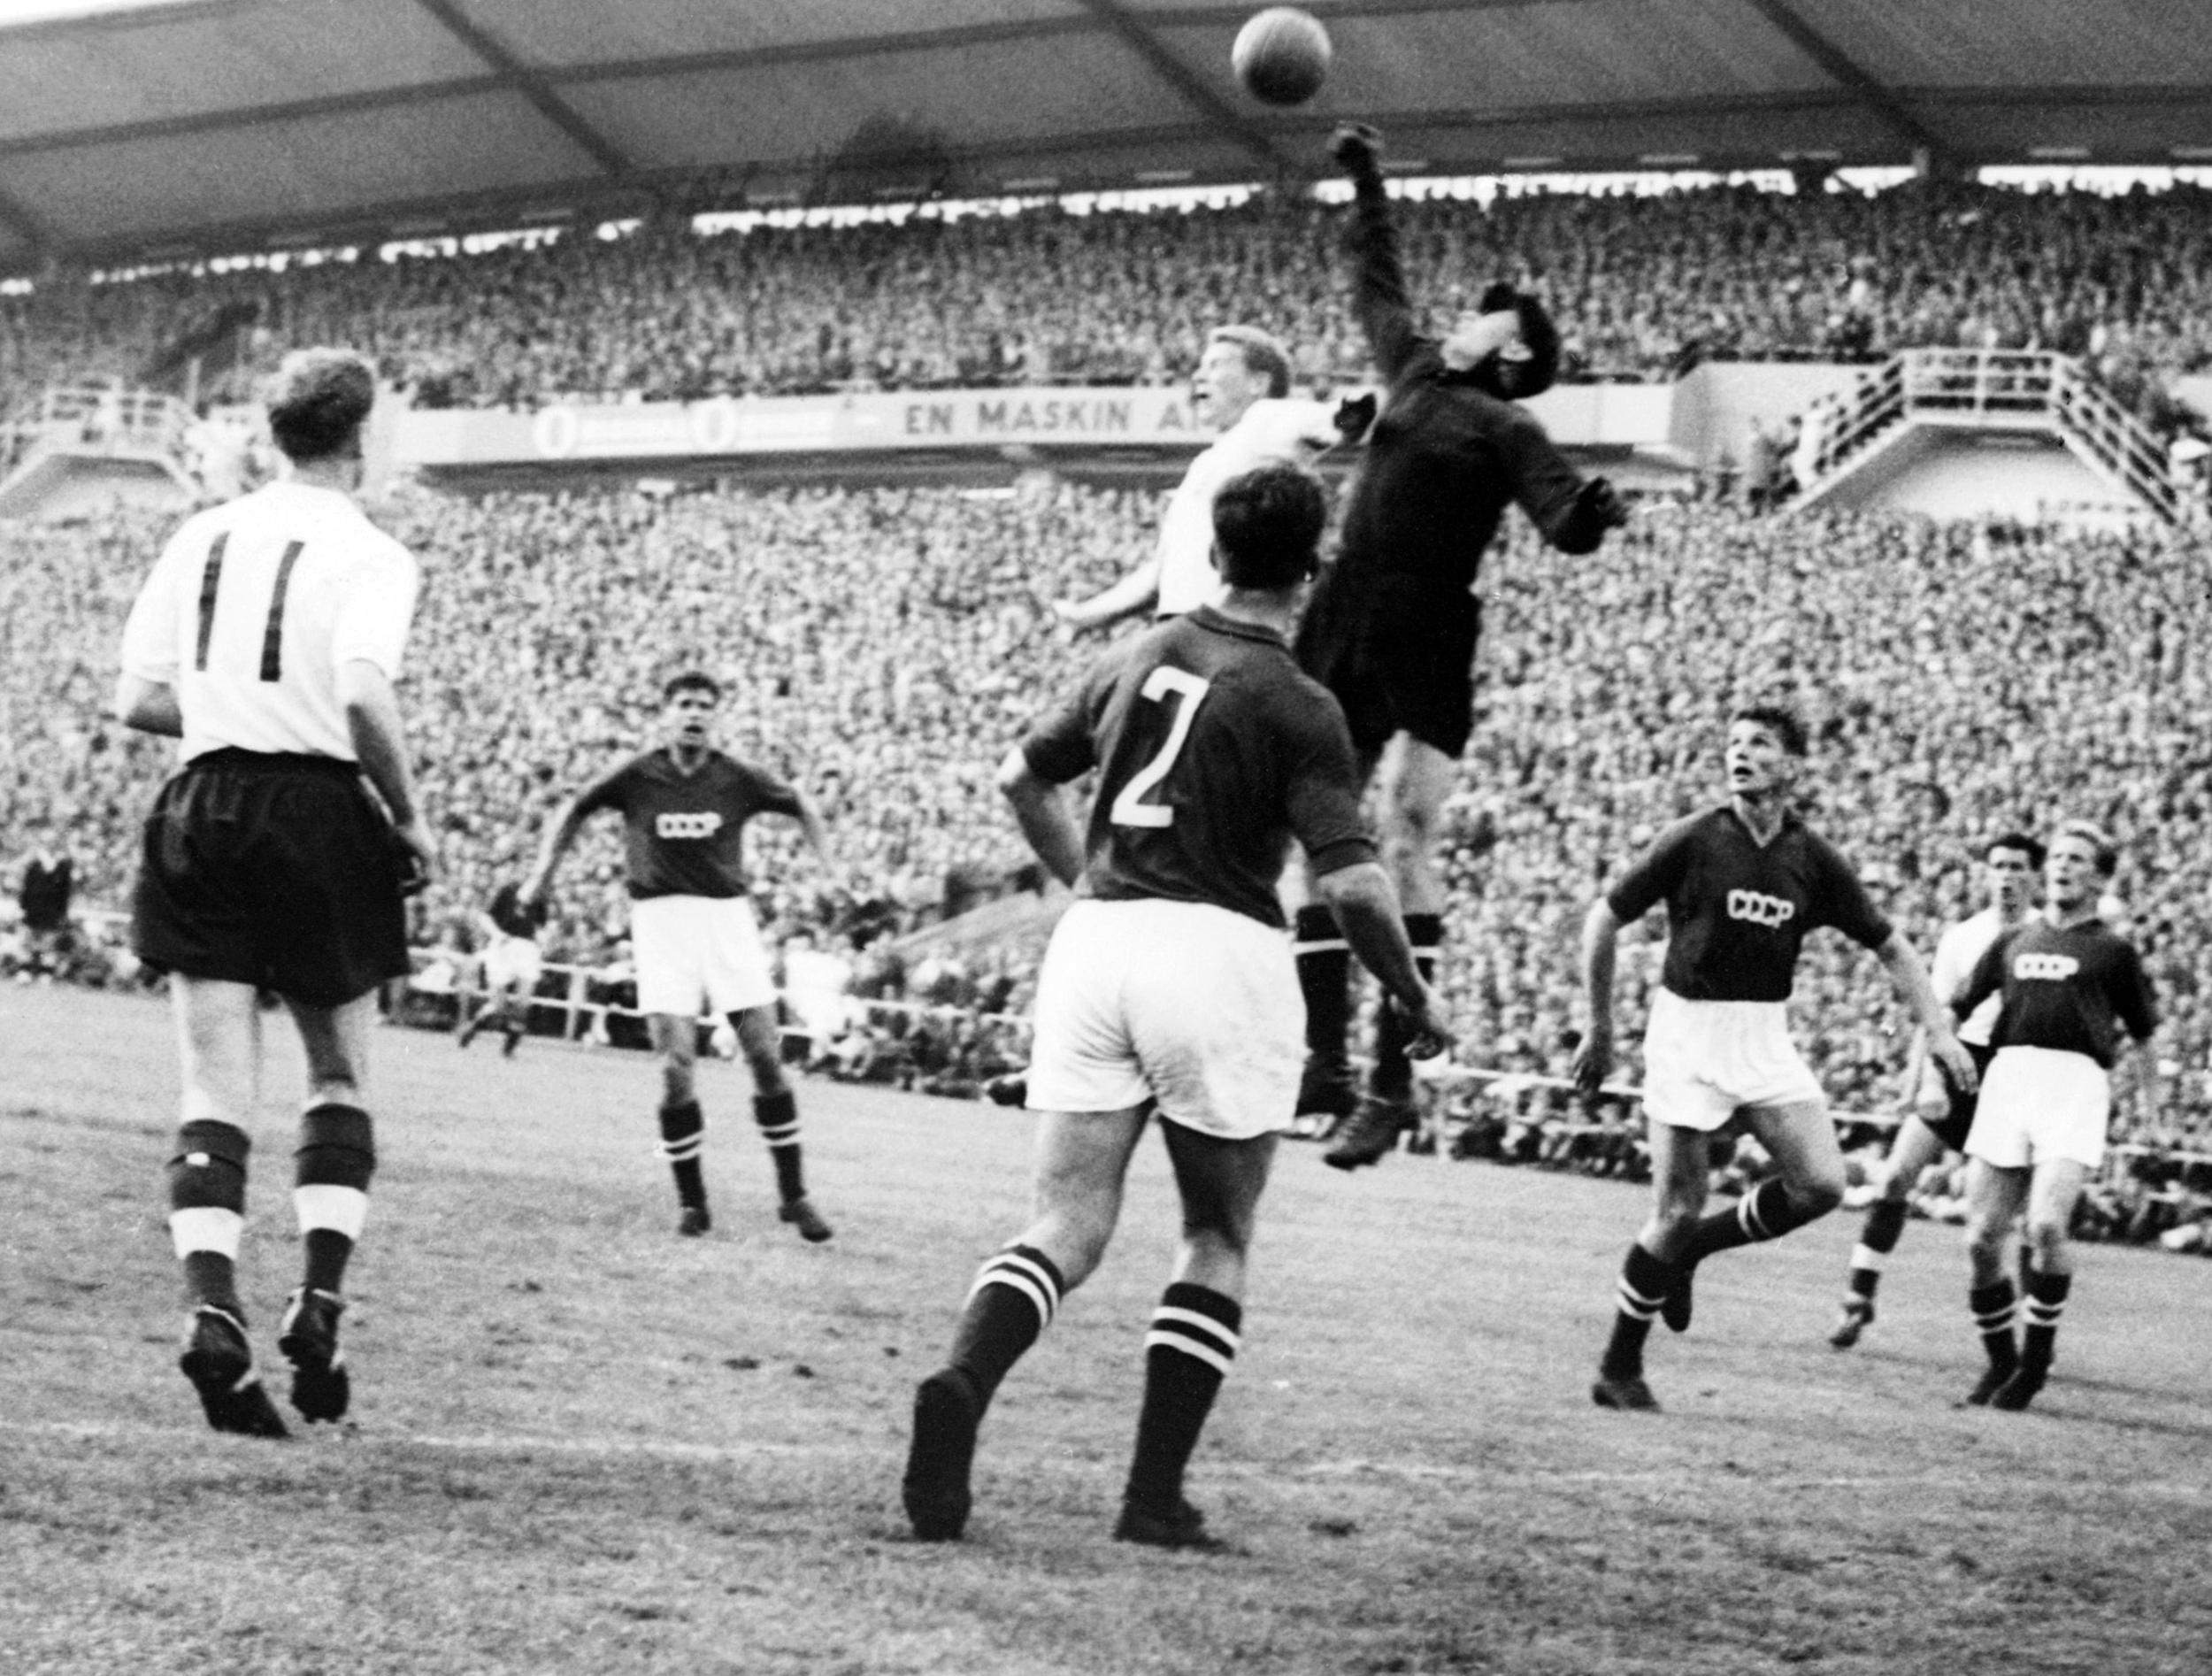 Goalkeeper Lev Yashin (black) from the Soviet Union boxes the ball away from an English player during the World Cup first round soccer match between the Soviet Union and England 08 June 1958 in Goteborg. The match ended in a 2-2 tie. AFP PHOTO/PRESSENBILD (Photo credit should read STAFF/AFP via Getty Images)